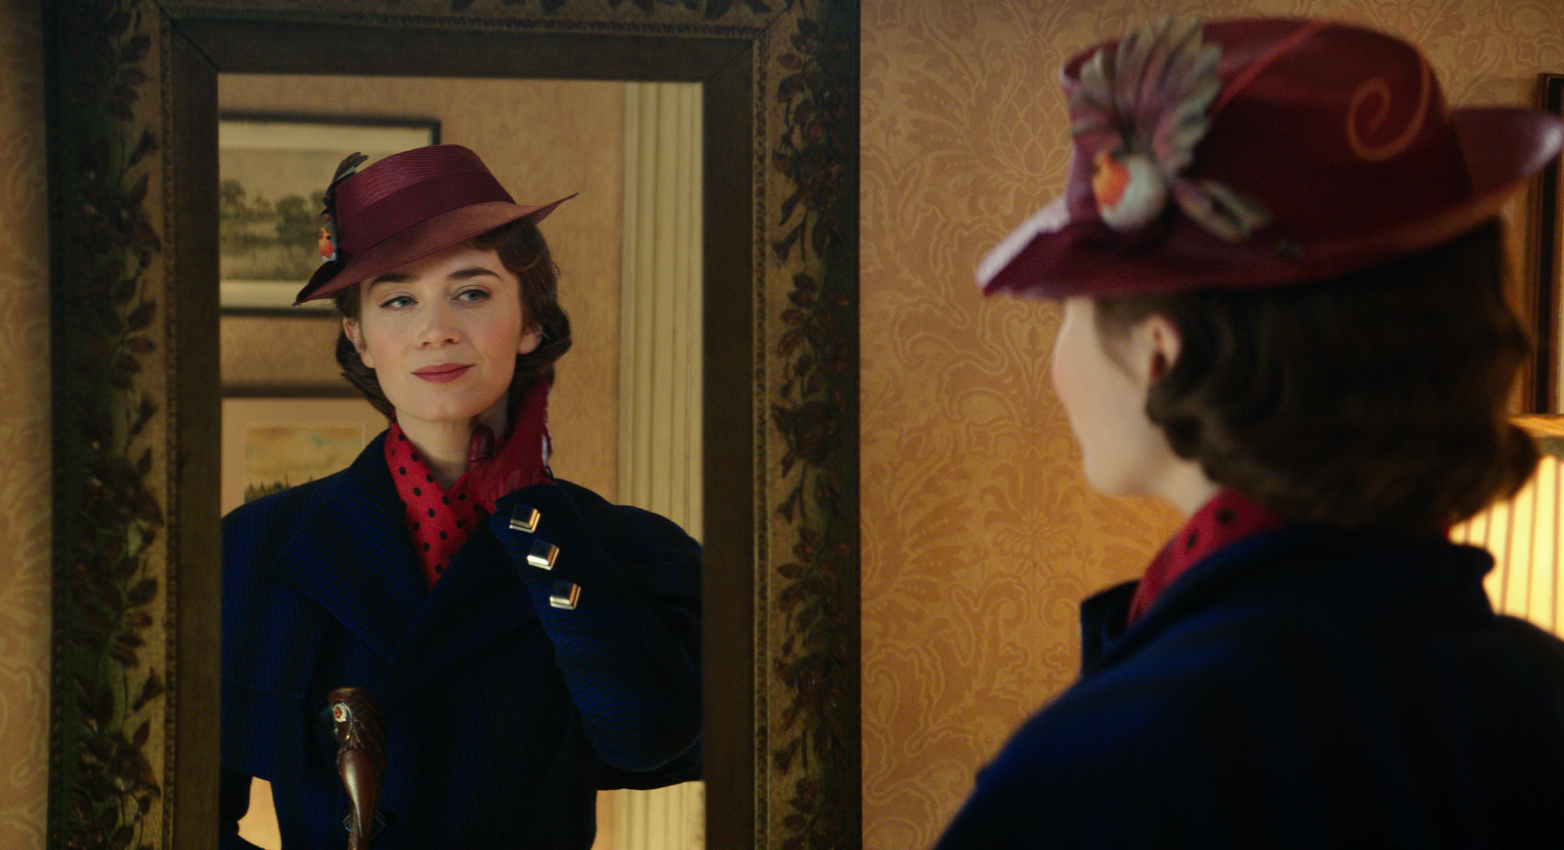 Mary Poppins Emily blunt